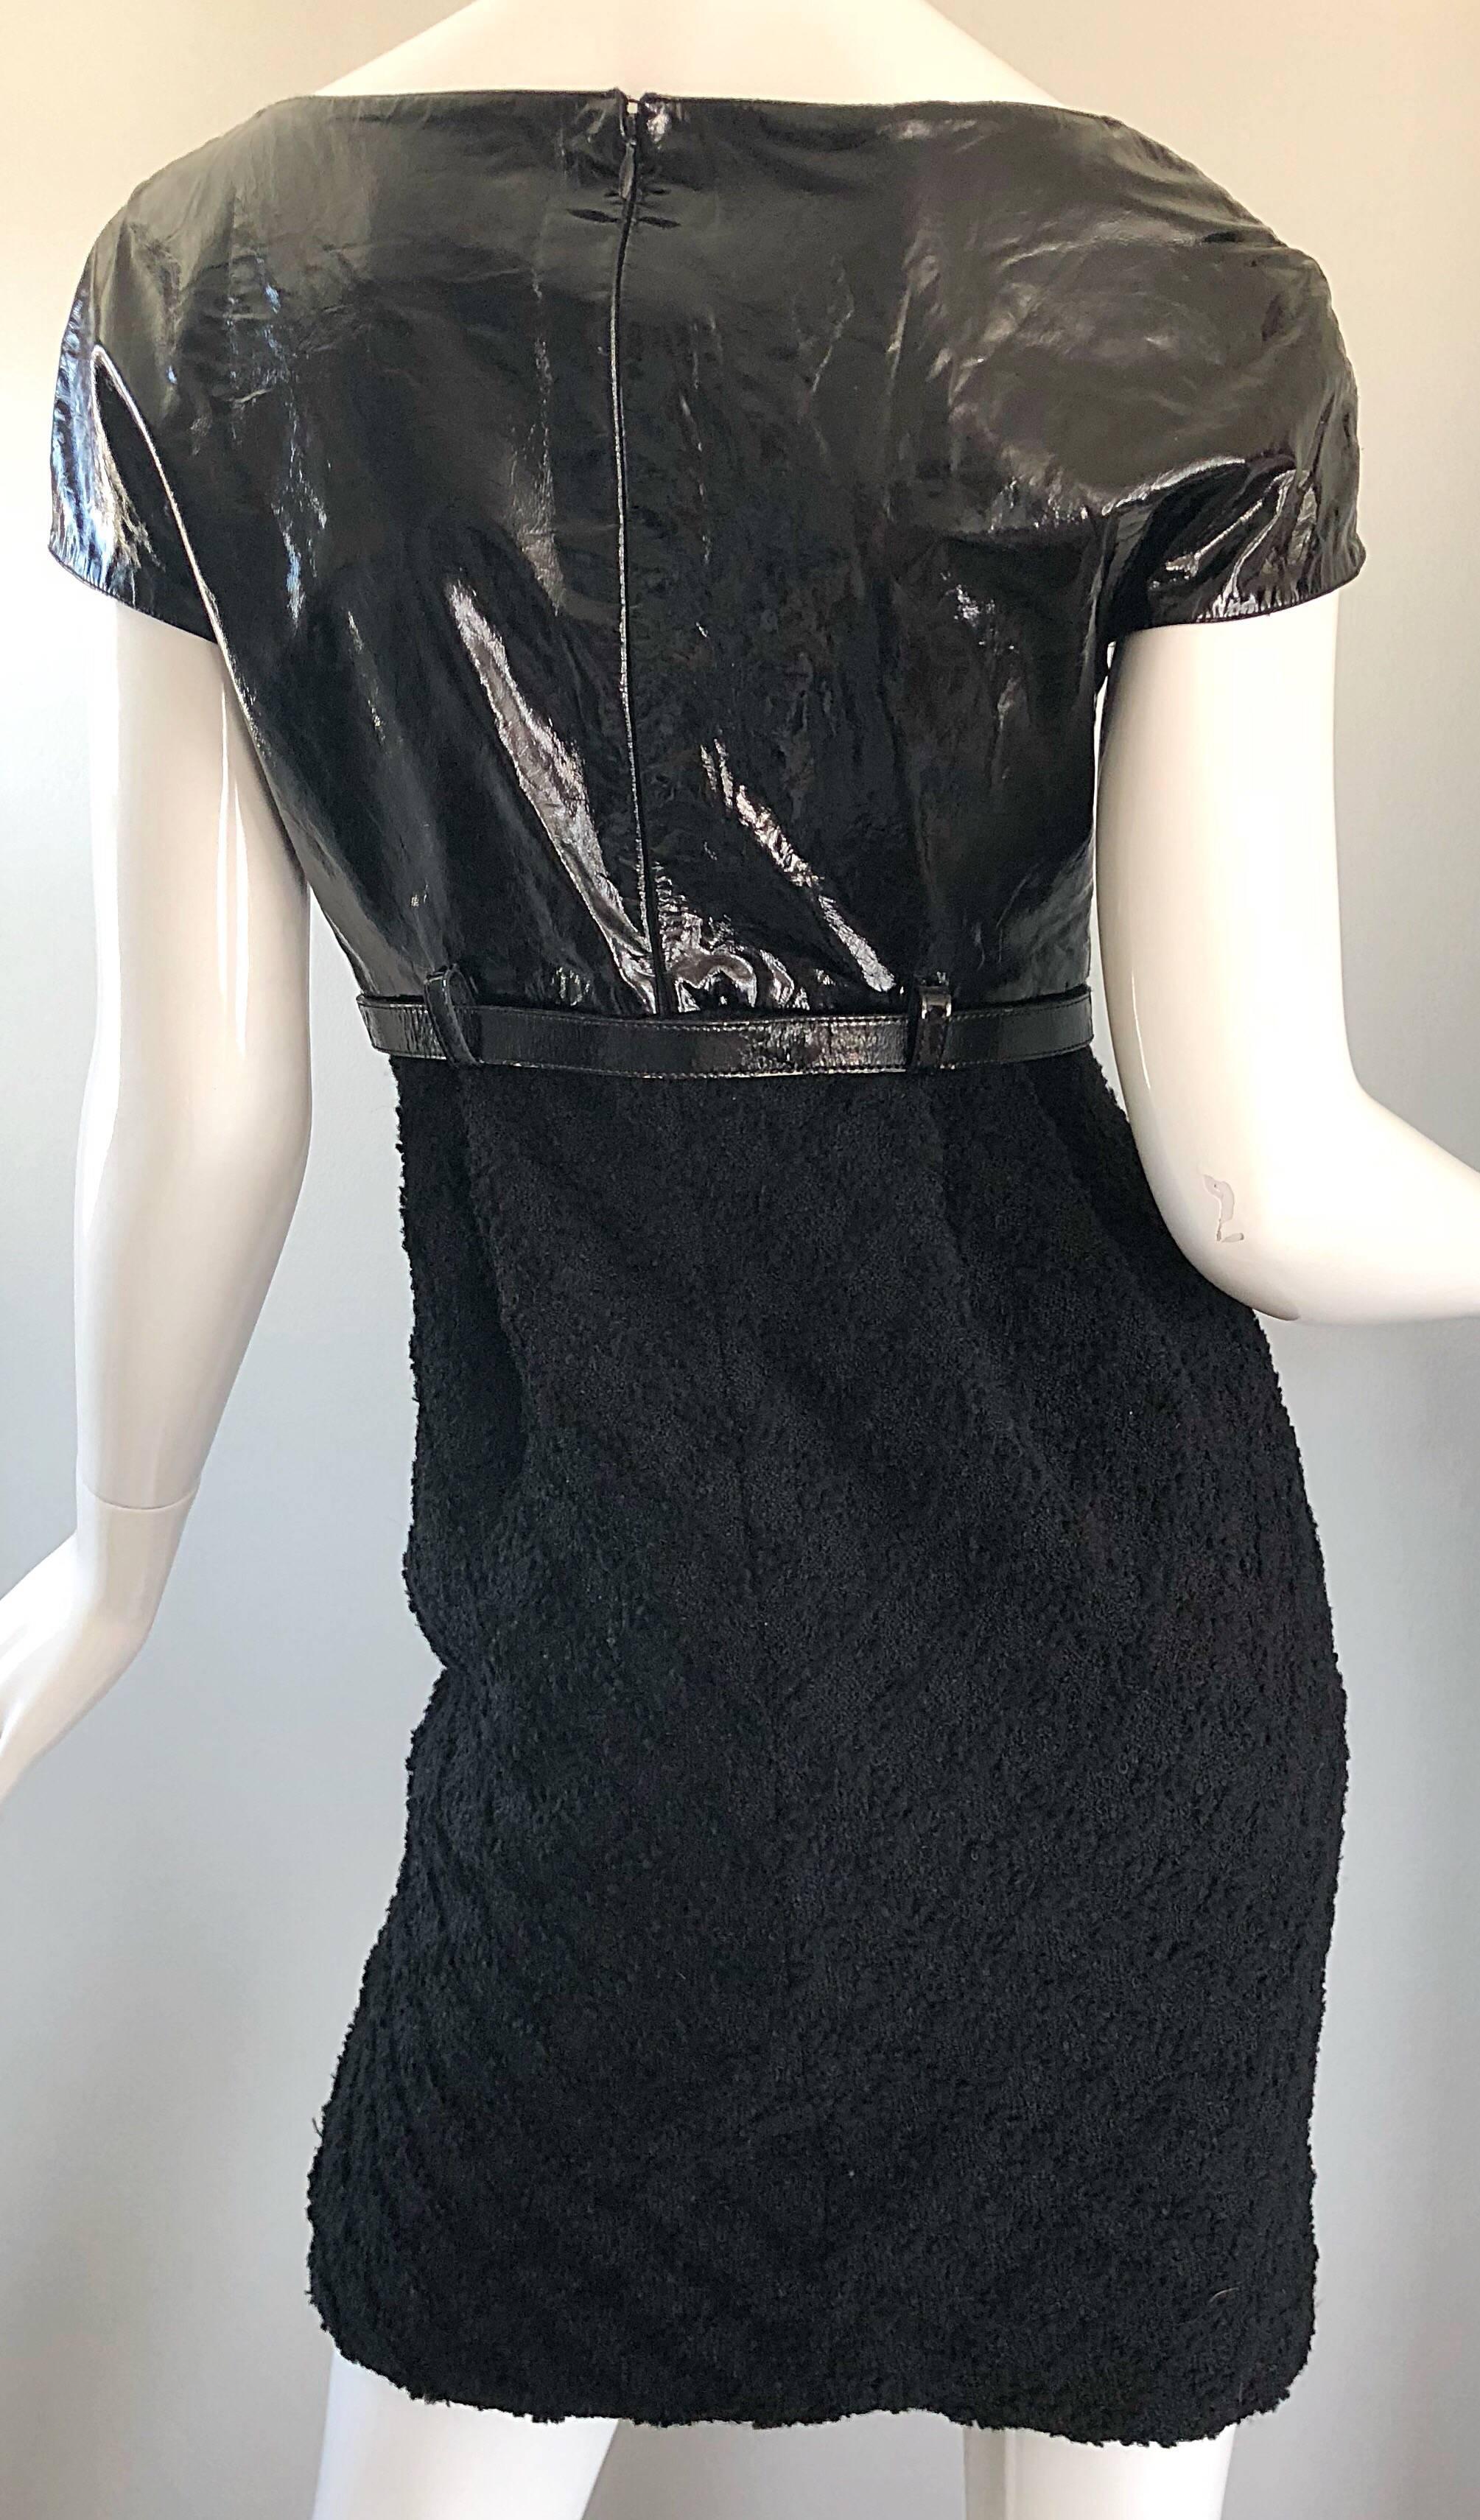 Documented Gianni Versace Couture Vintage F/W 1994 Black PVC Wool 90s Dress For Sale 3